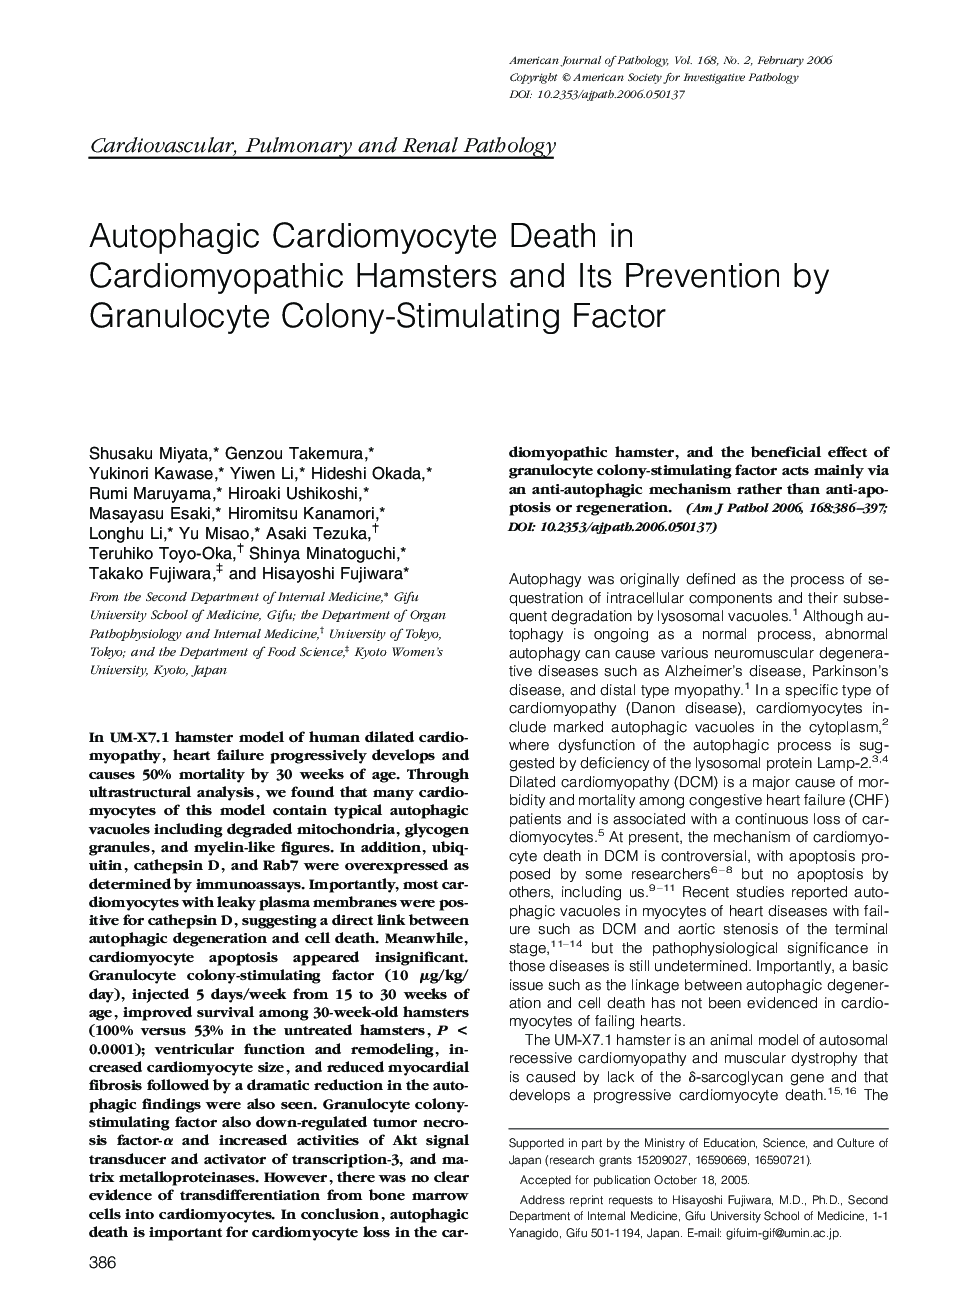 Autophagic Cardiomyocyte Death in Cardiomyopathic Hamsters and Its Prevention by Granulocyte Colony-Stimulating Factor